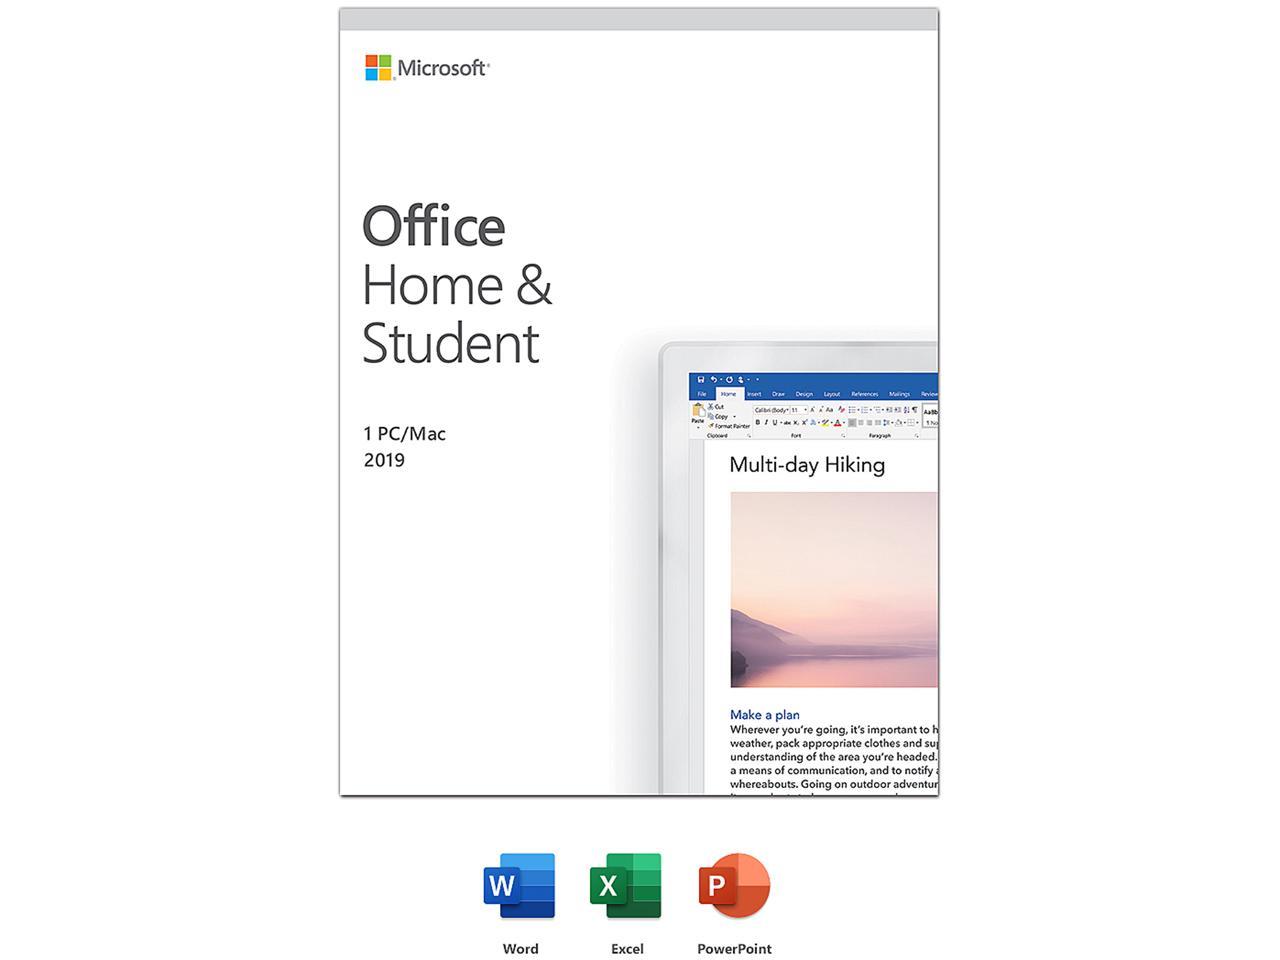 i bought office home & student 2016 for pc instead of mac